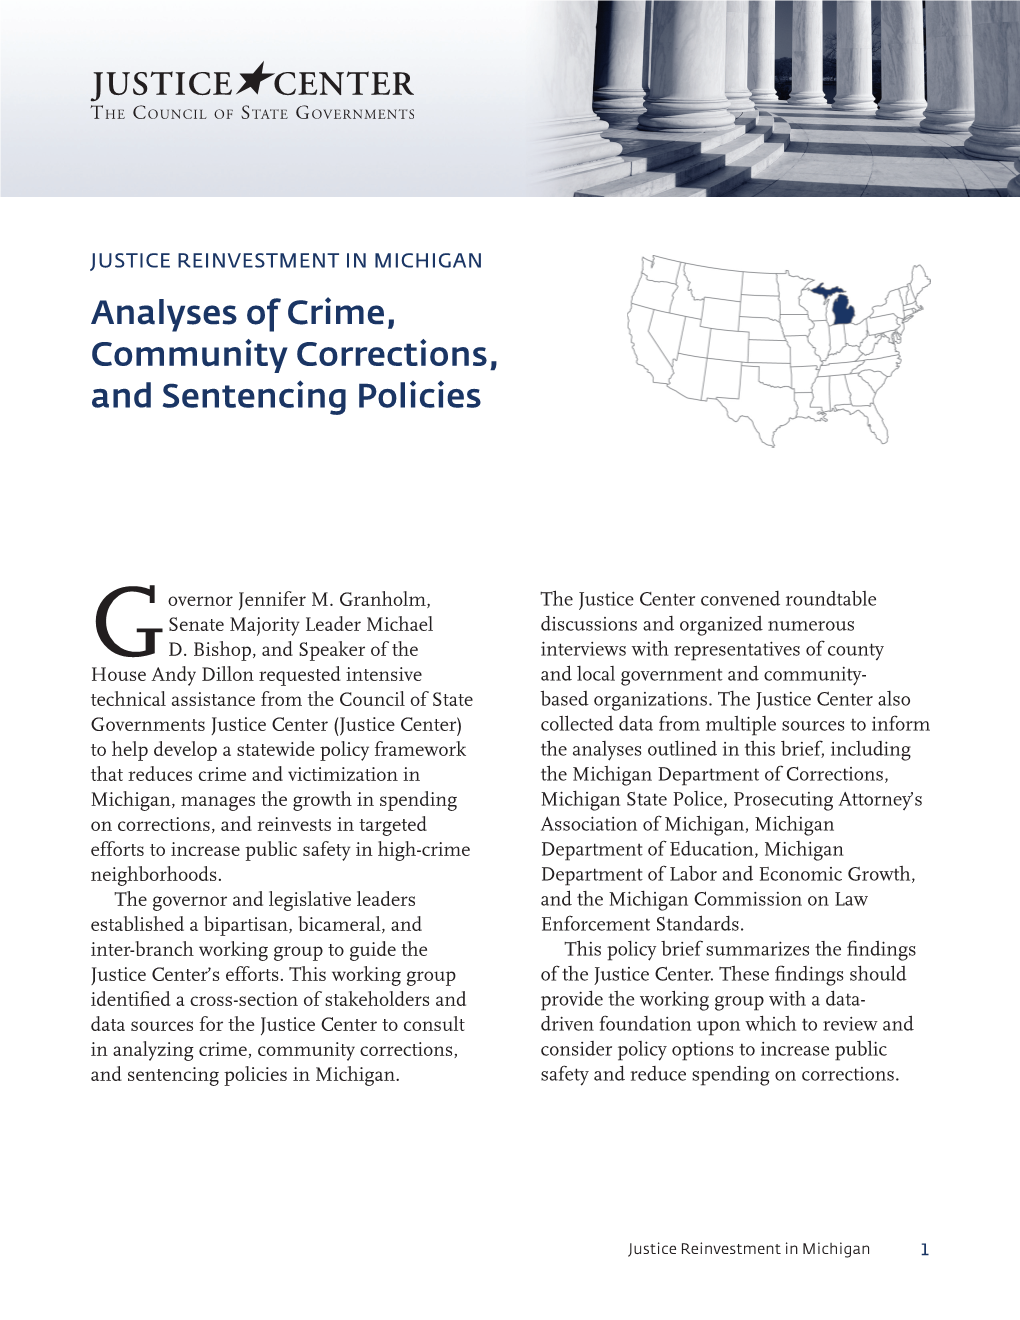 Analyses of Crime, Community Corrections, and Sentencing Policies